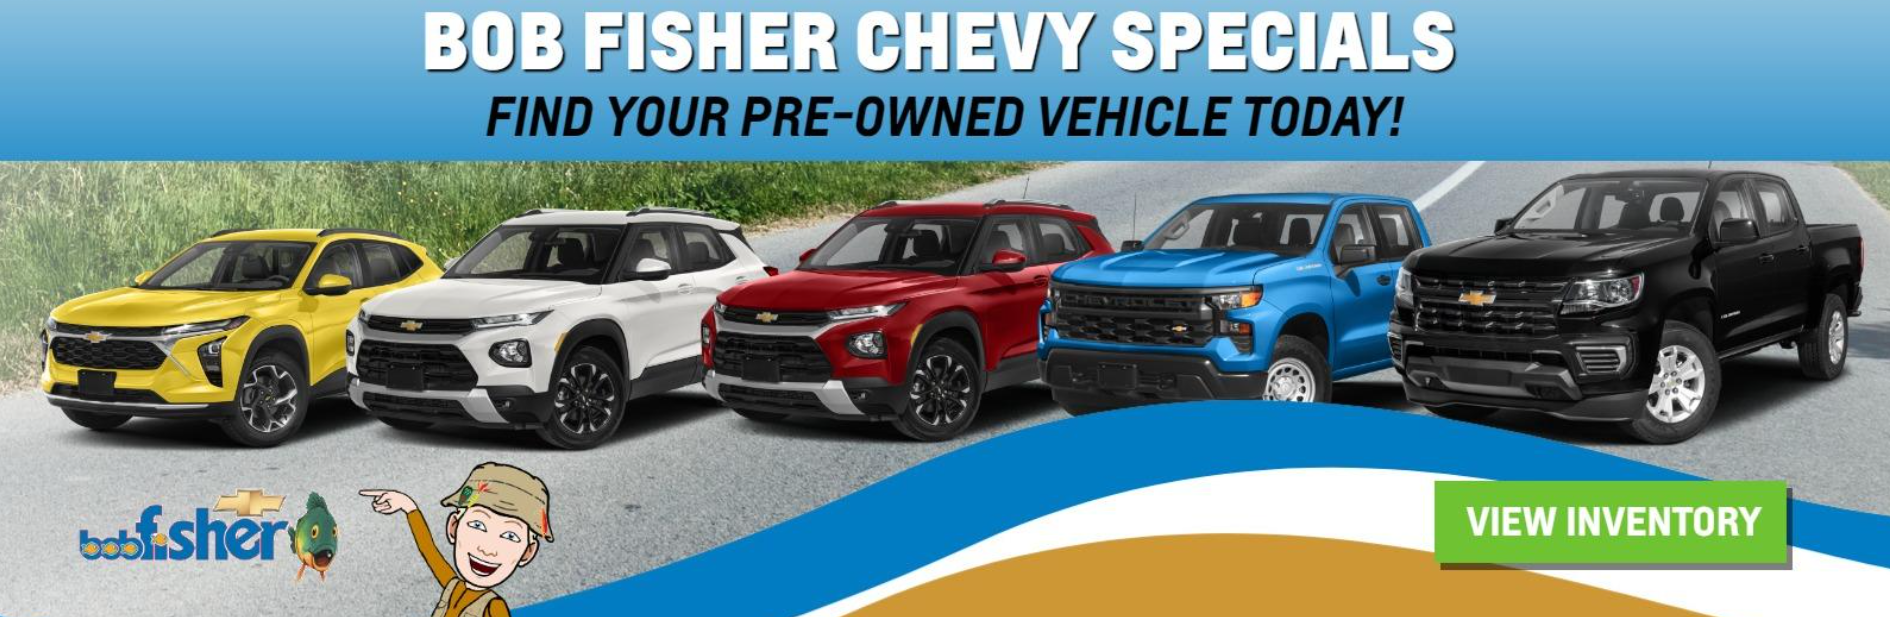 BOB FISHER CHEVY SPECIALSFIND YOUR PRE-OWNED VEHICLE TODAY!